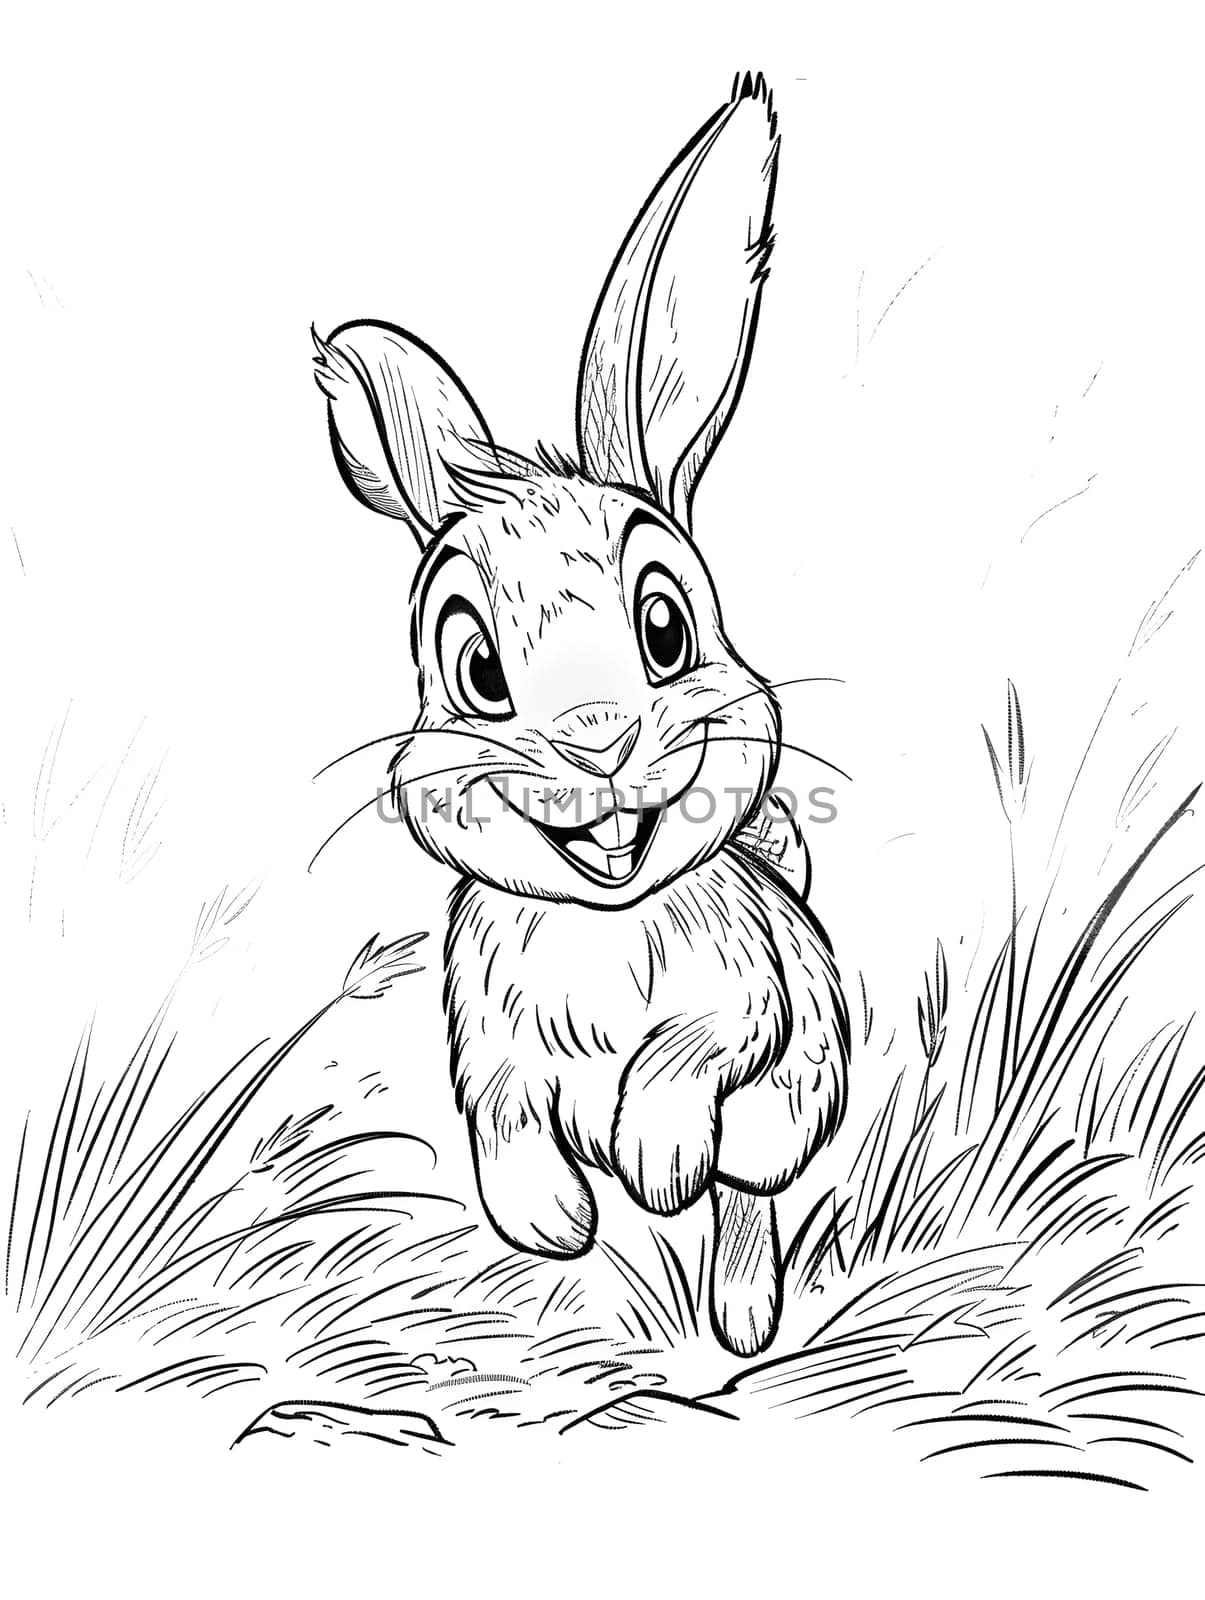 Cartoon drawing of a rabbit sprinting in the grass by Nadtochiy